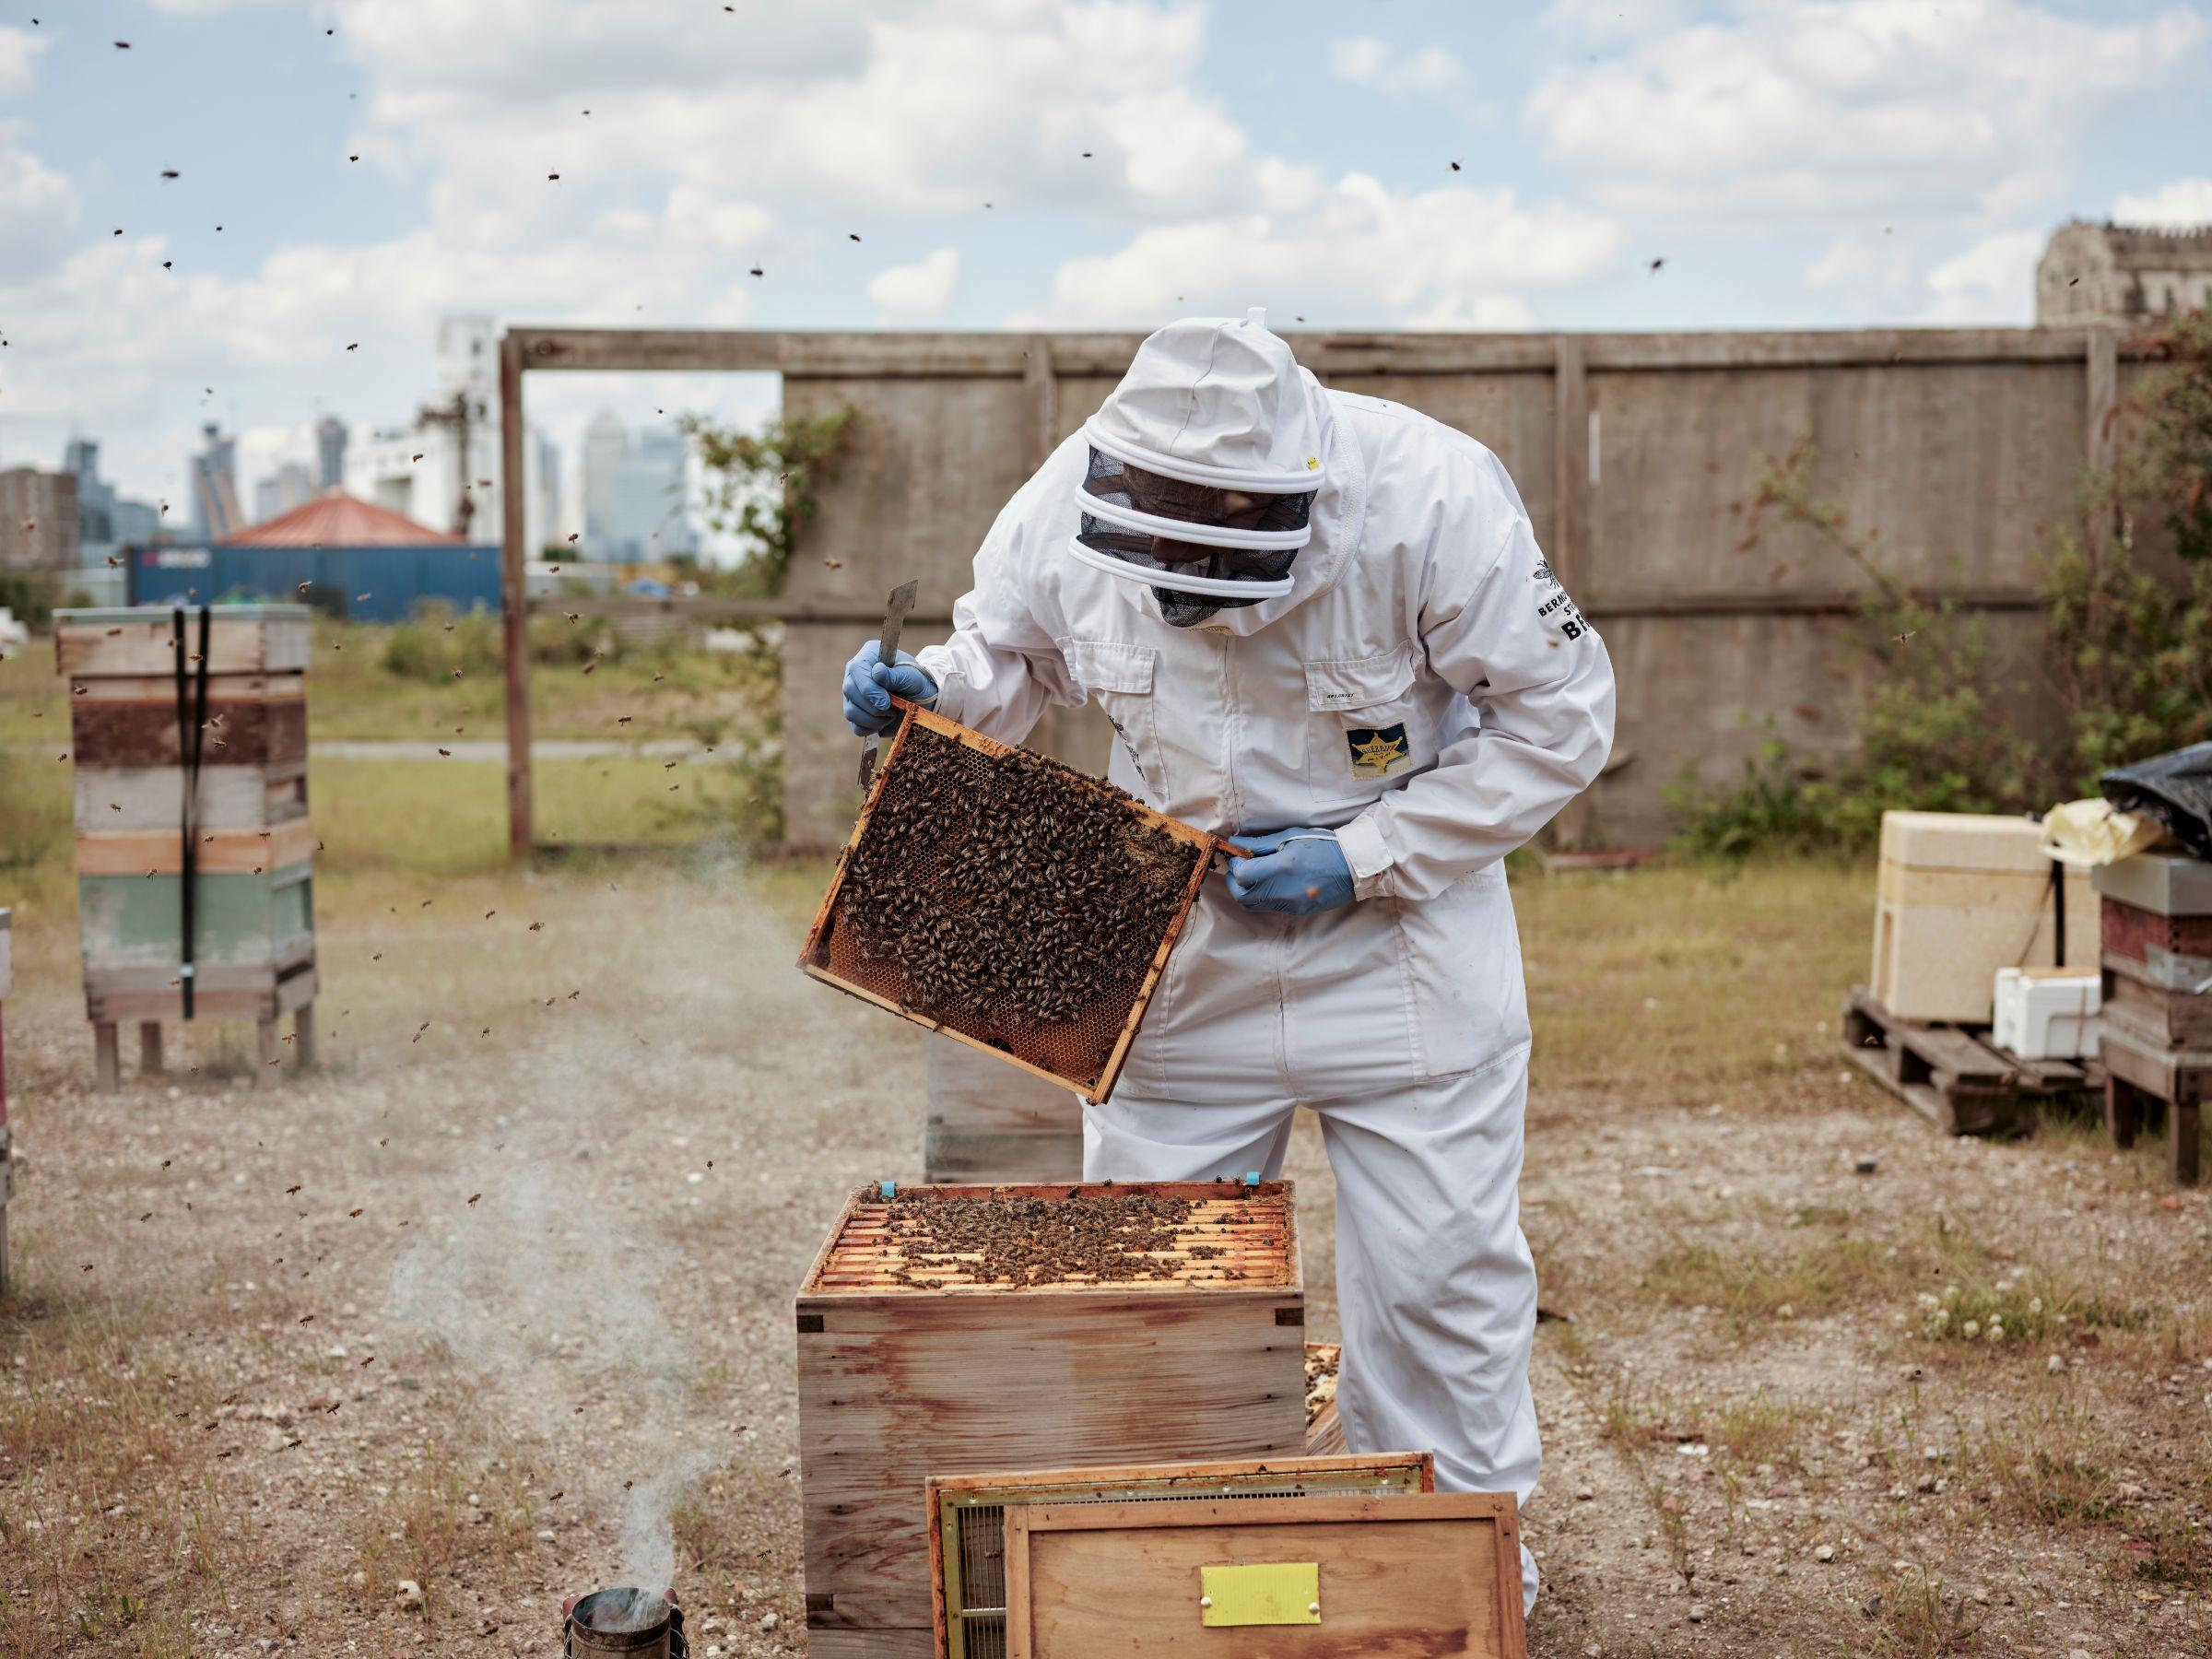 A beekeeper lifting a panel full of bees